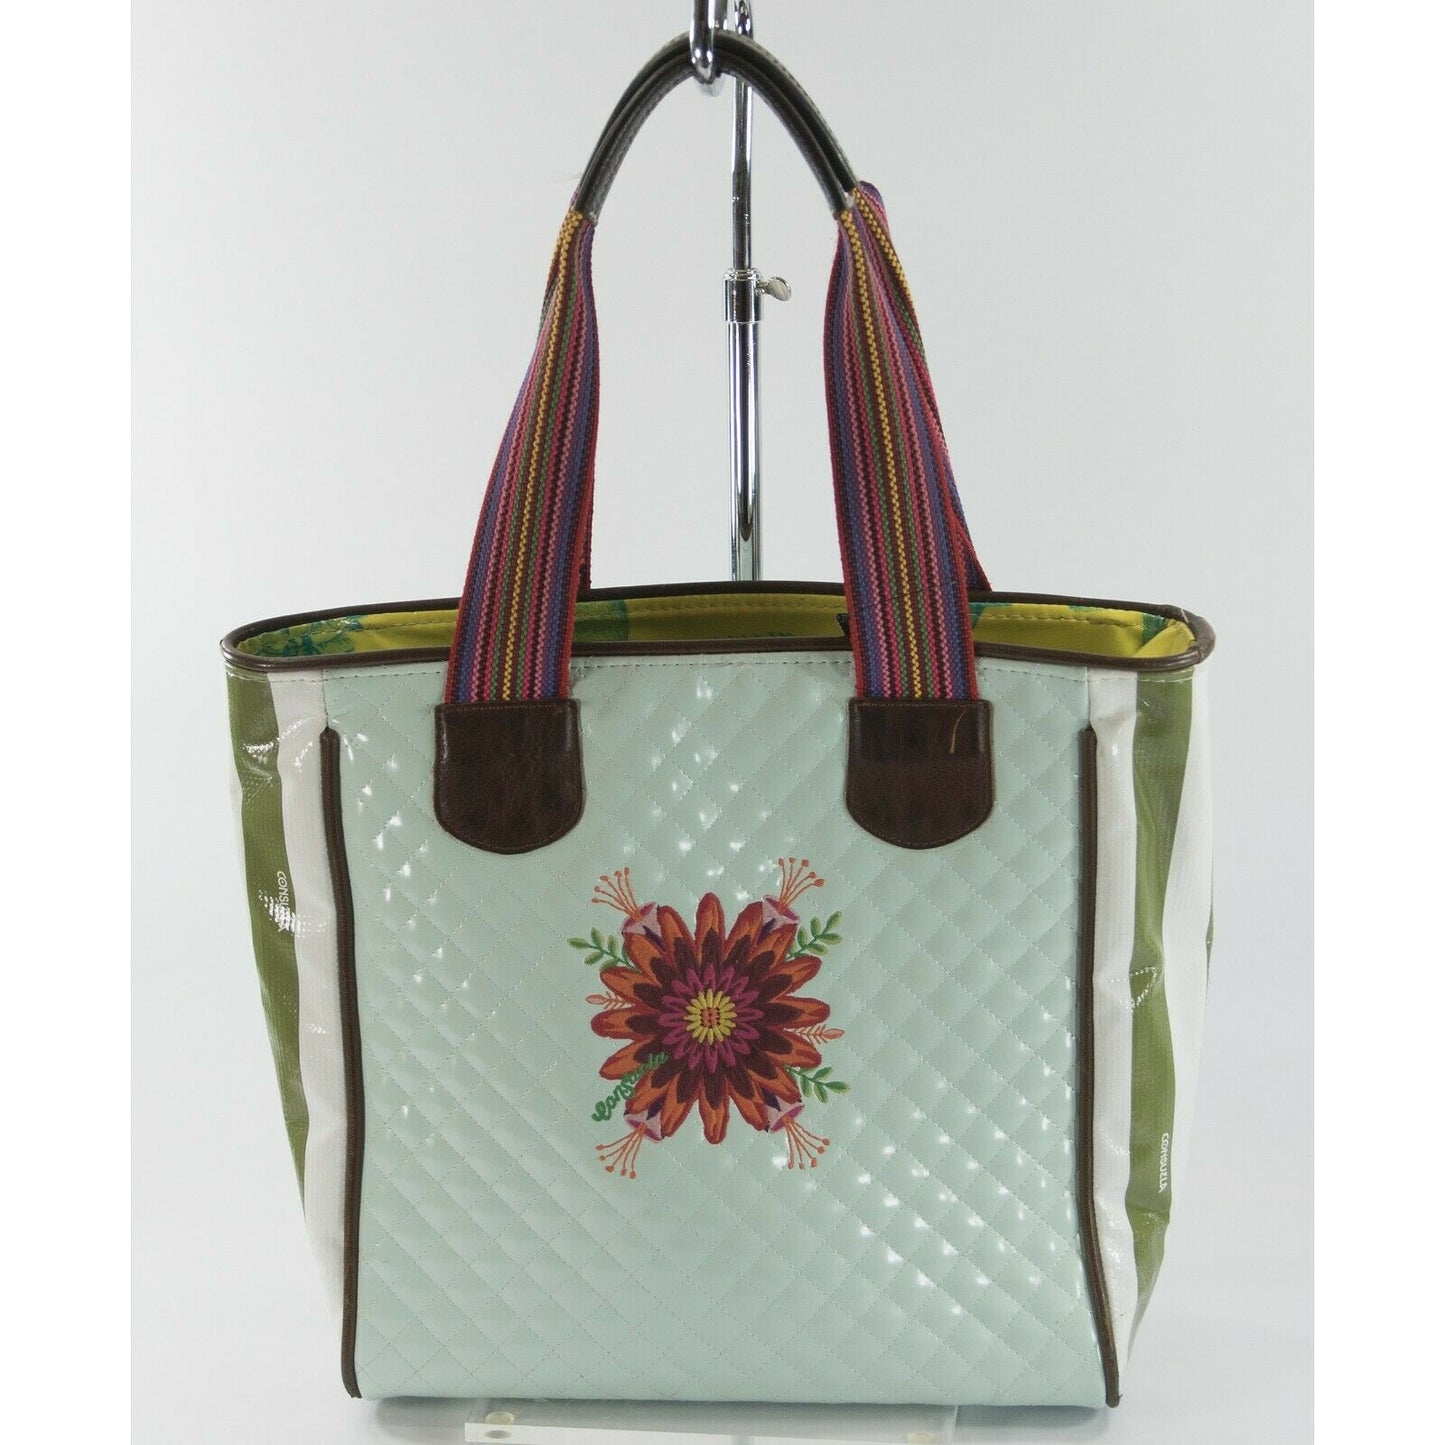 Consuela Austin Sophie Mint Floral Embroidered Leather Large Tote Bag EUC